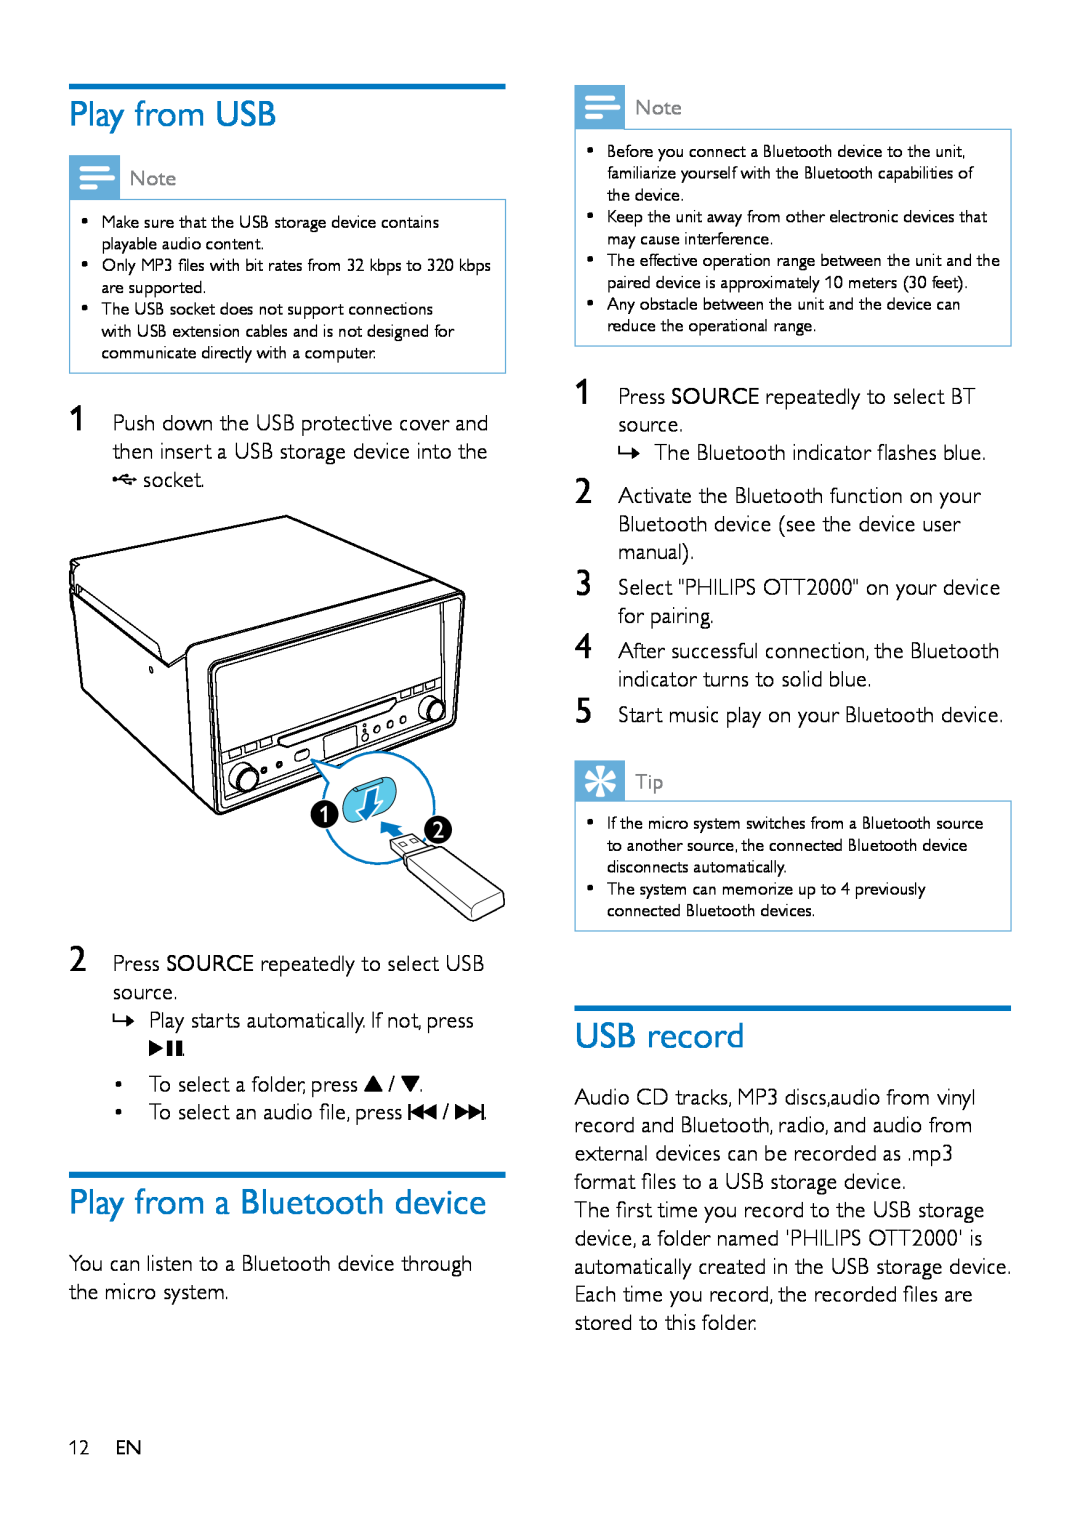 Philips OTT2000 user manual Play from USB, Play from a Bluetooth device, USB record 